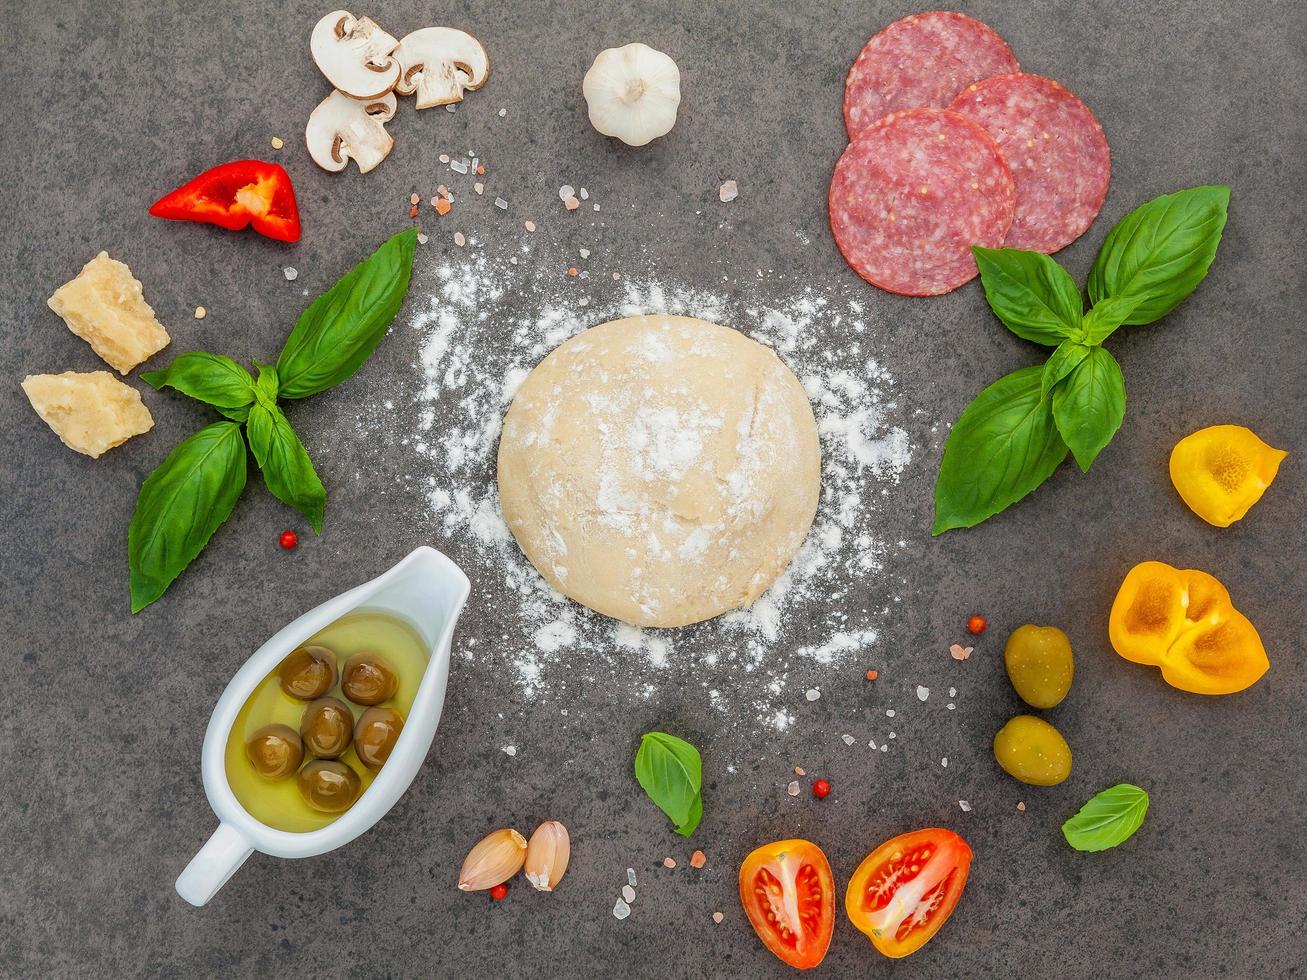 Pizza dough and ingredients on a dark background photo